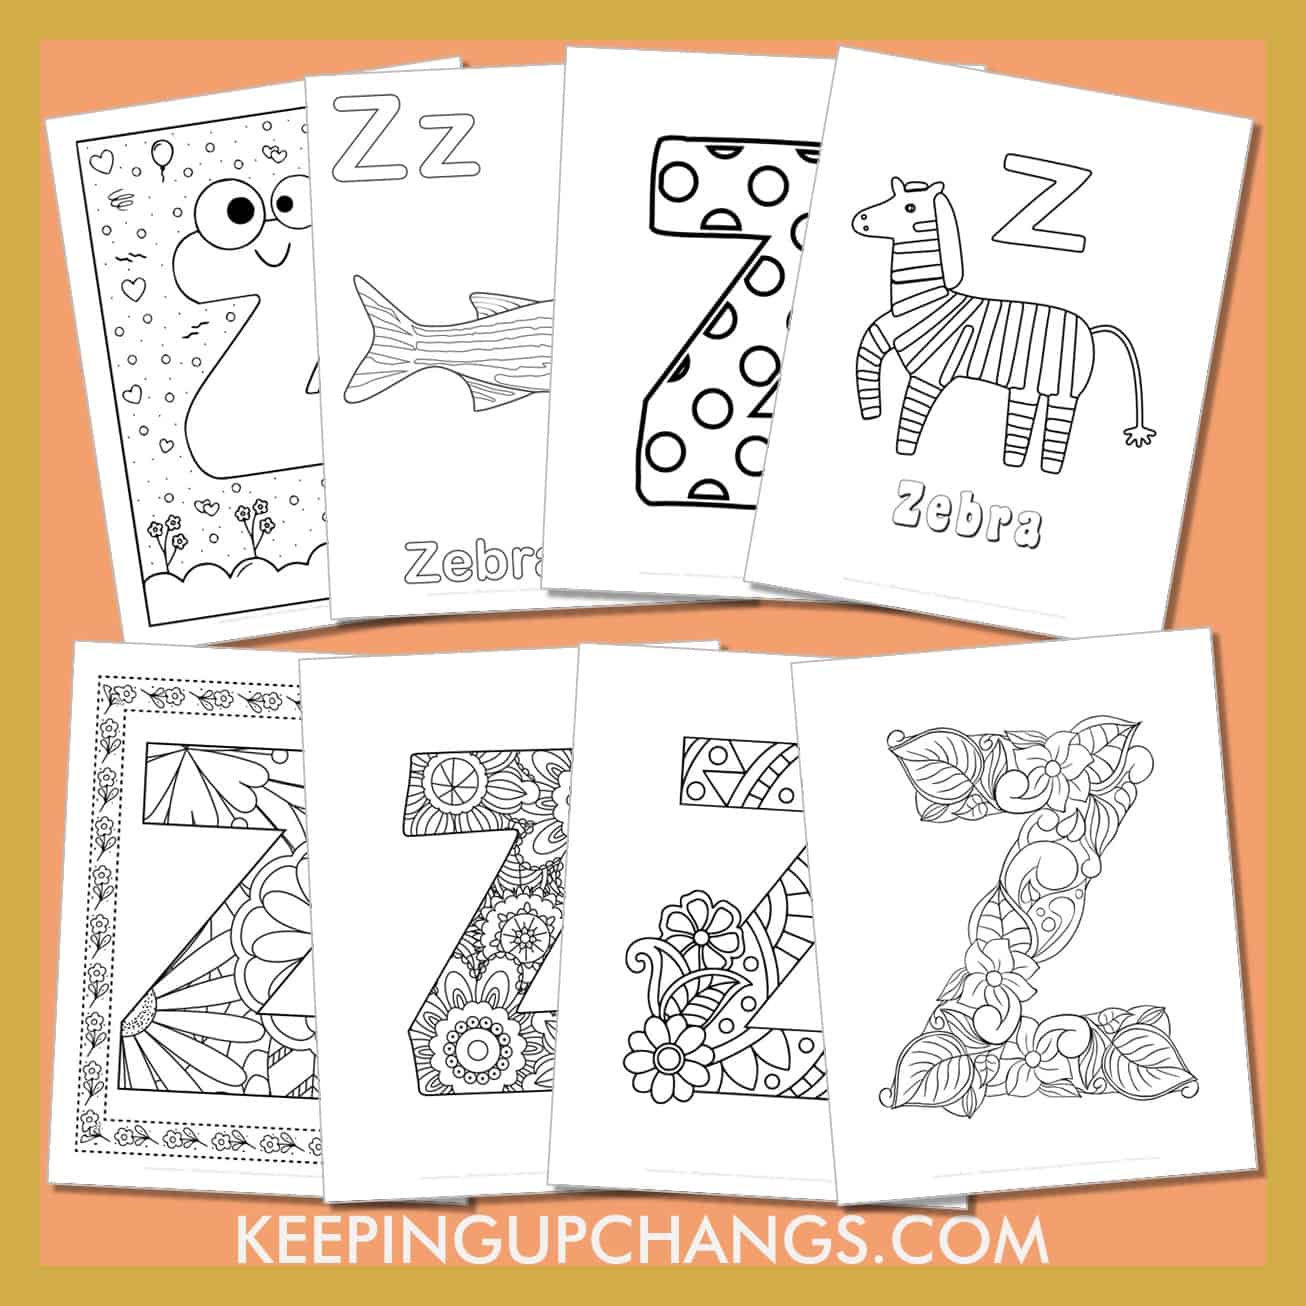 free alphabet letter z to color for toddlers, preschool, kindergarten, to adults.